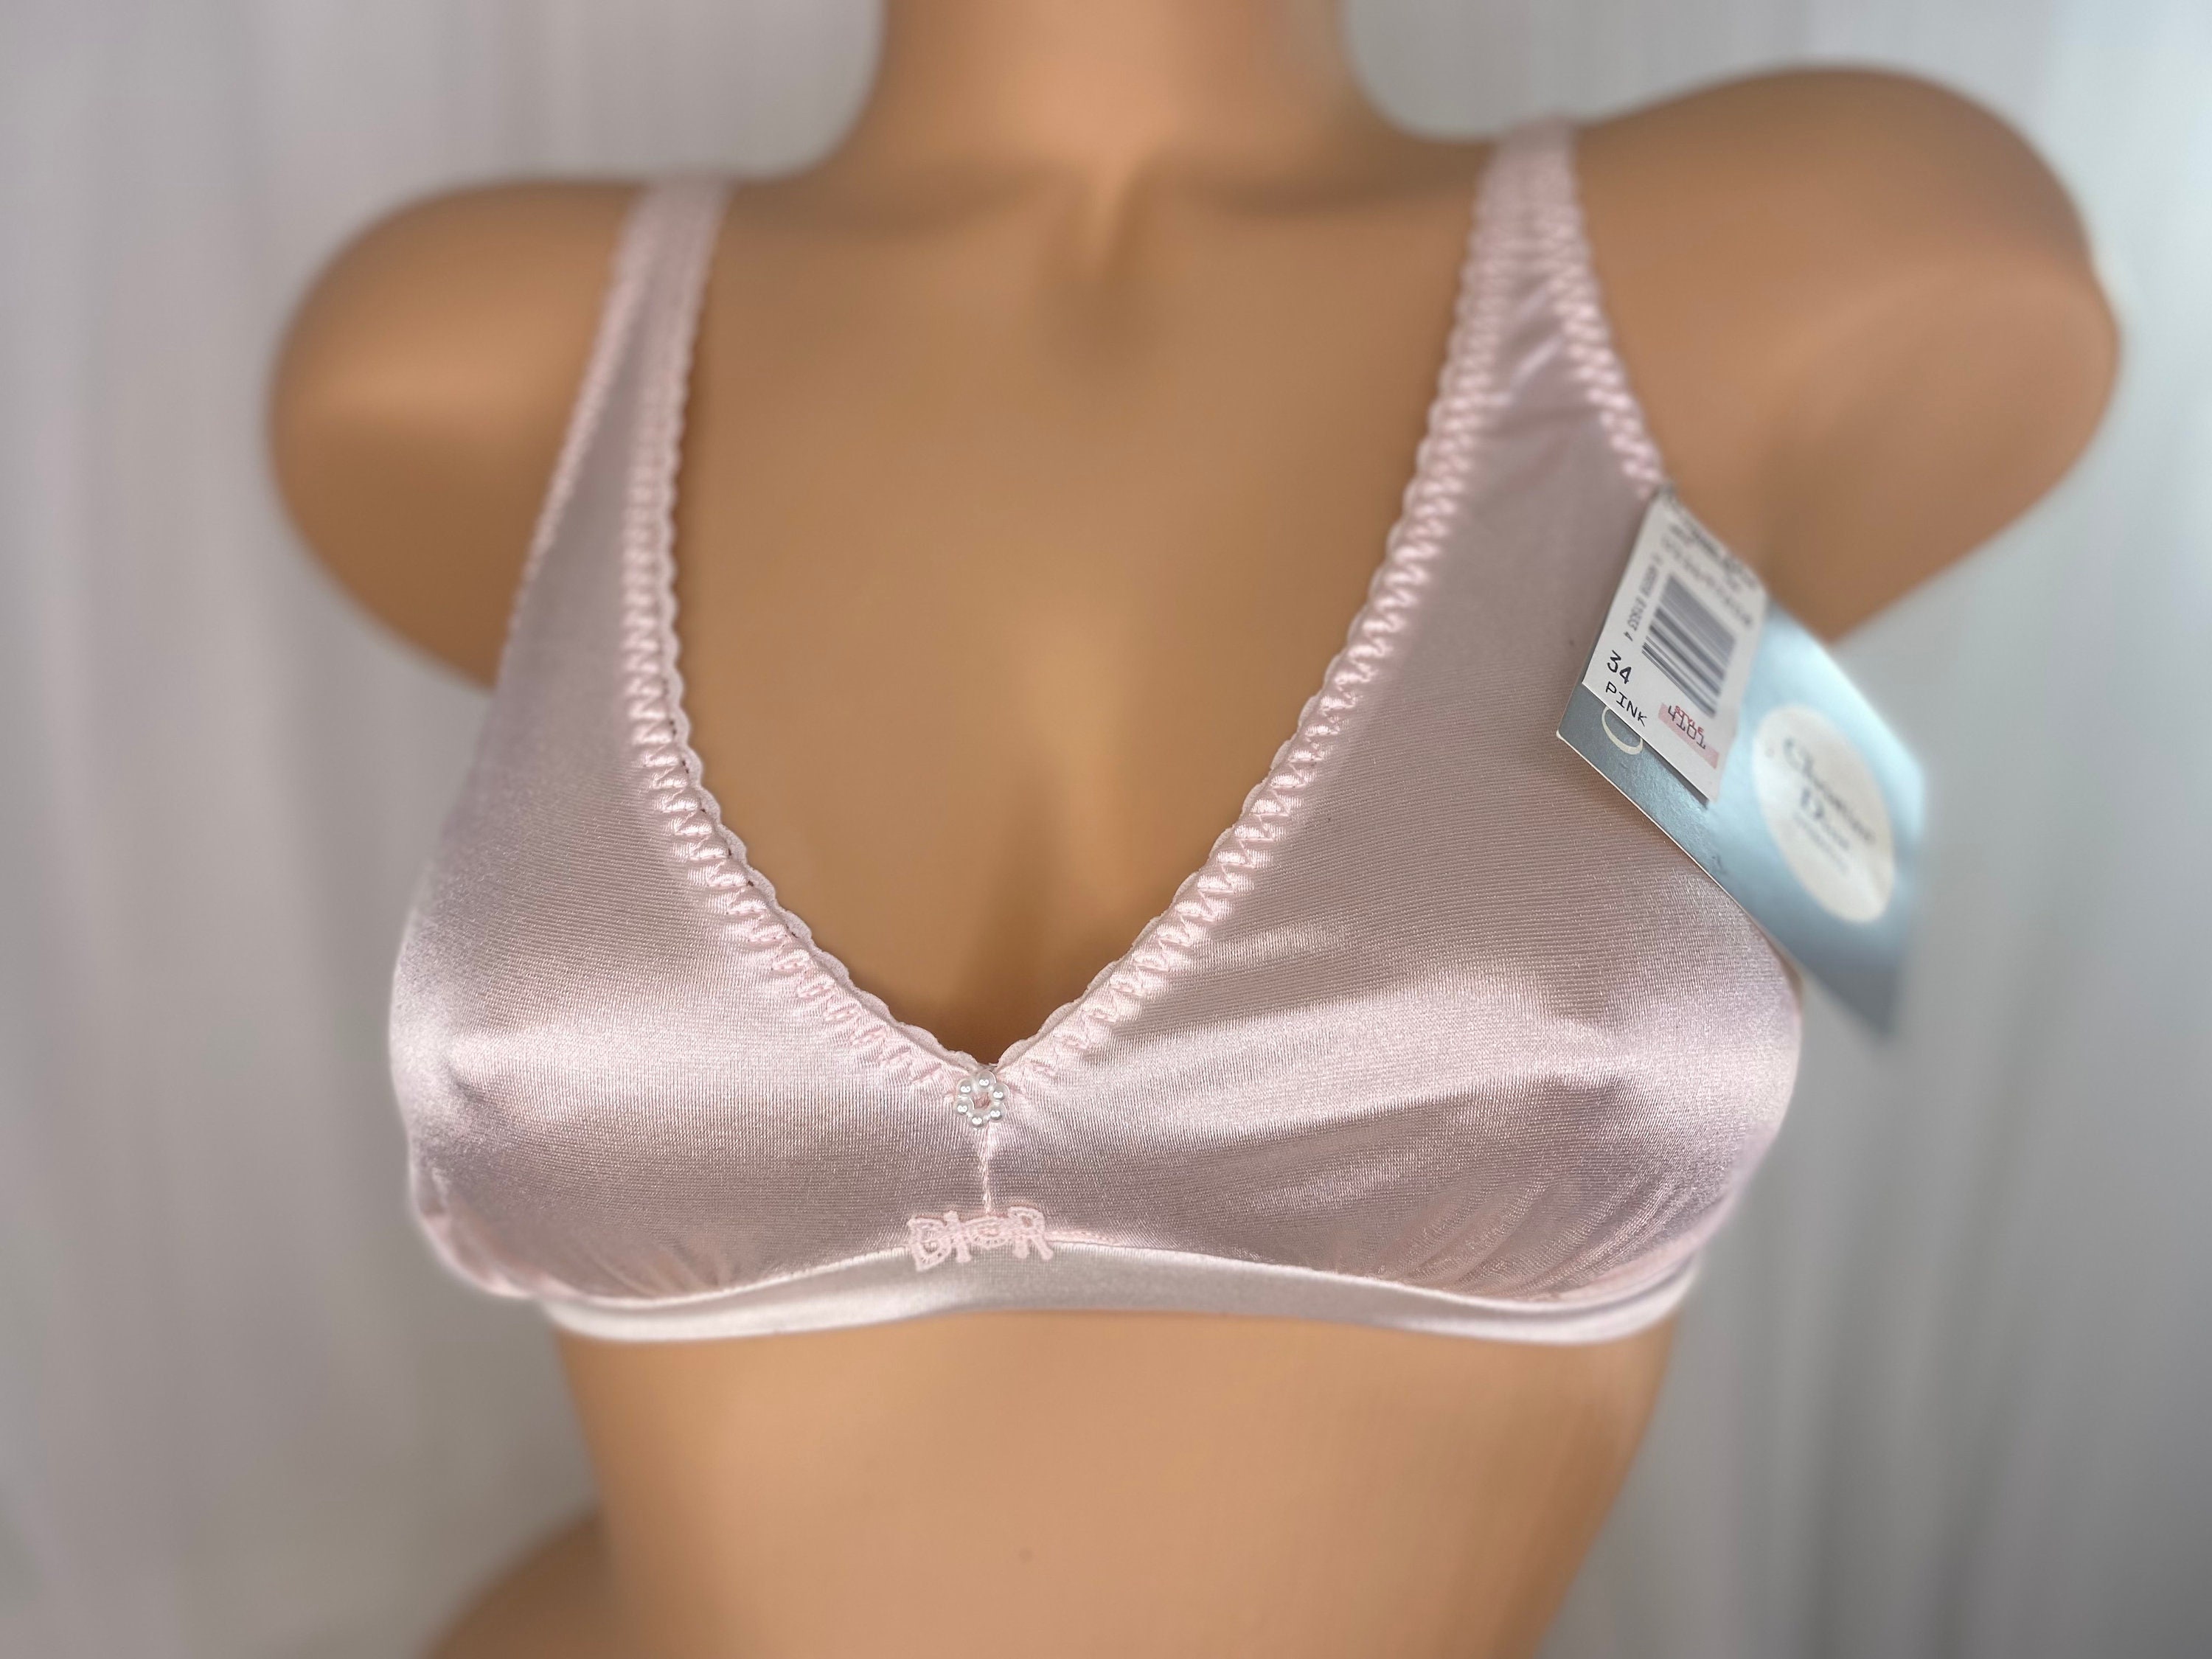 Christian Dior Second Skin Satin Bralette Baby Pink Wire Free Nylon Bra Top  Style 4101 34 C Rare Vintage Dior Lingerie Deadstock 